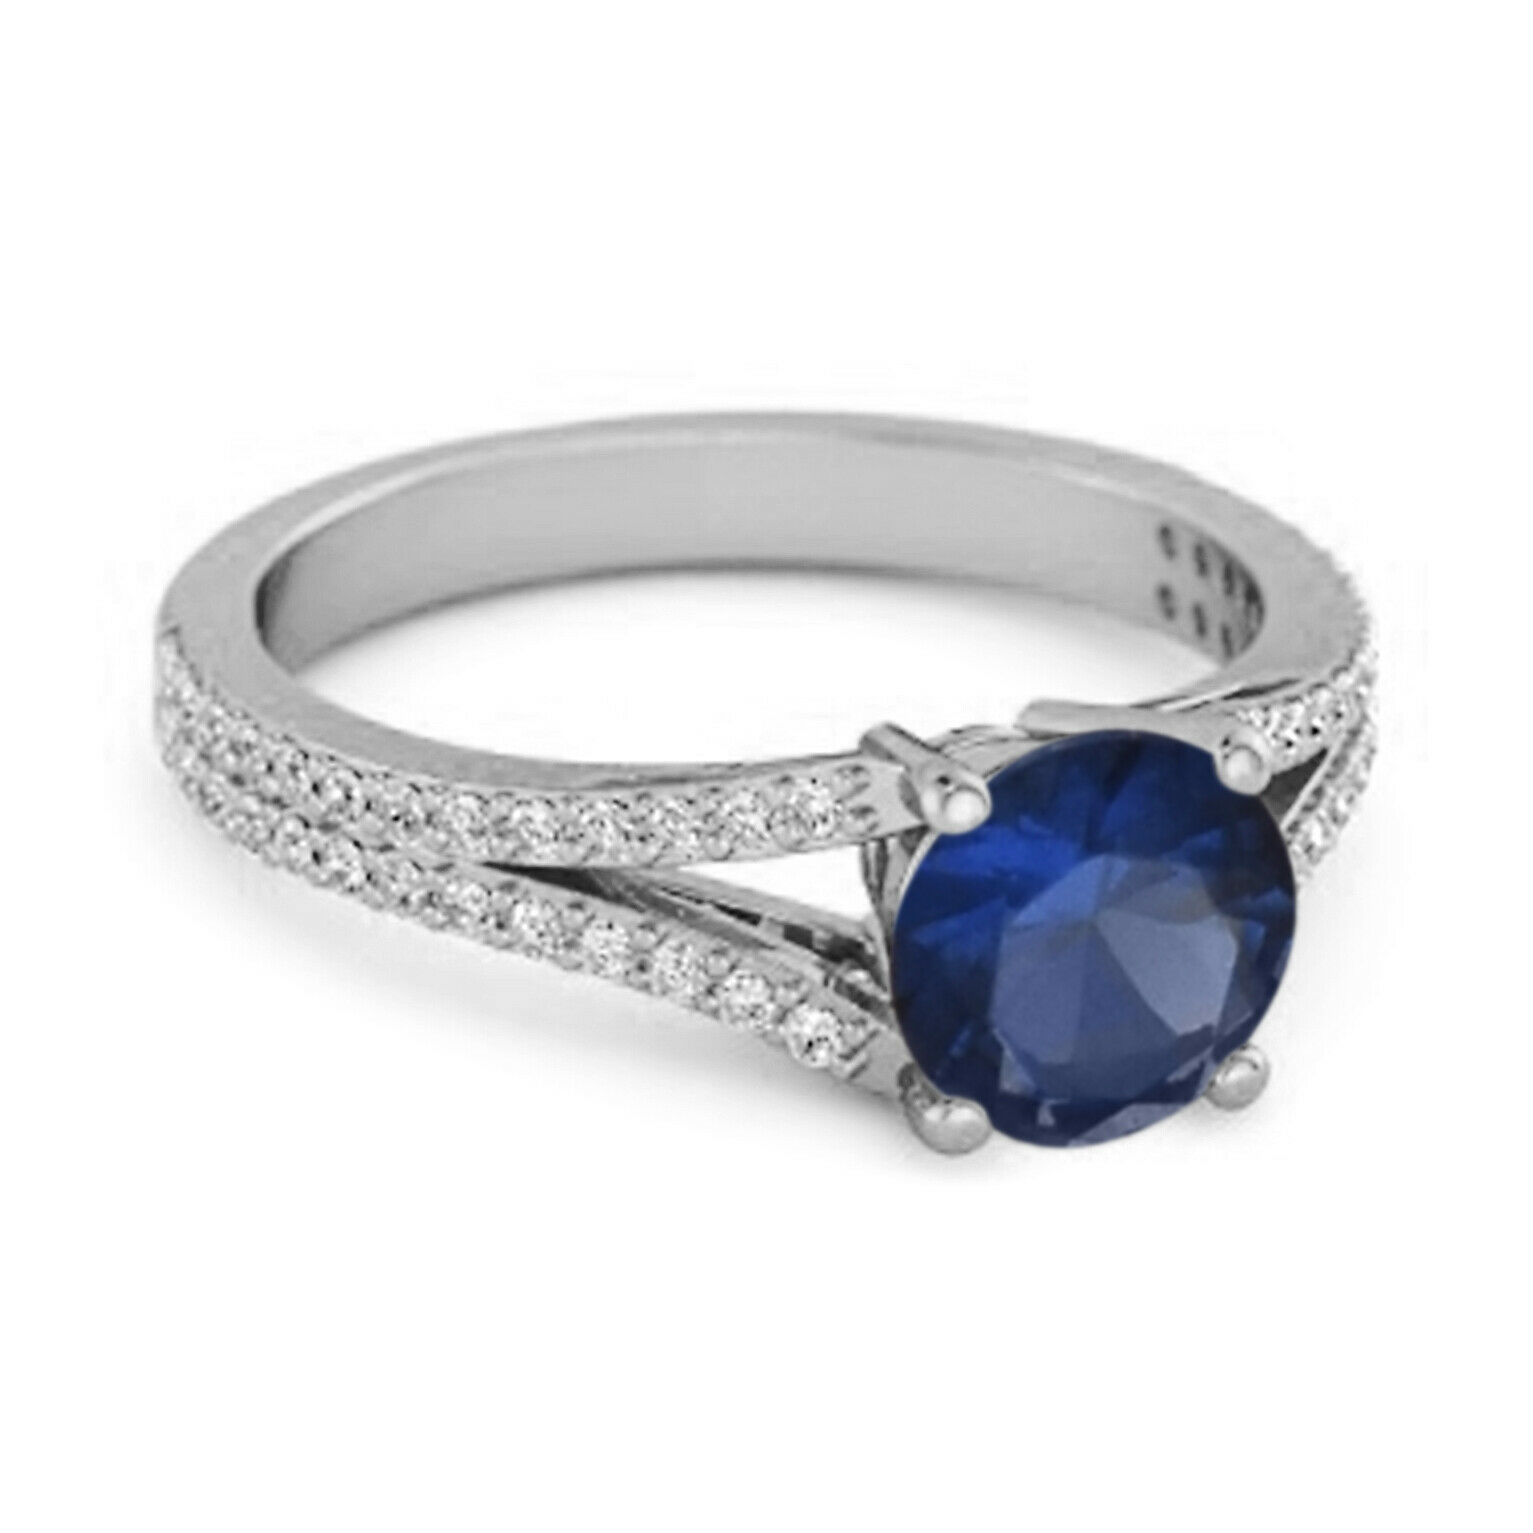 Felicity Design 9k White Gold 0.50 Ctw Blue Sapphire Solitaire Accents Ring